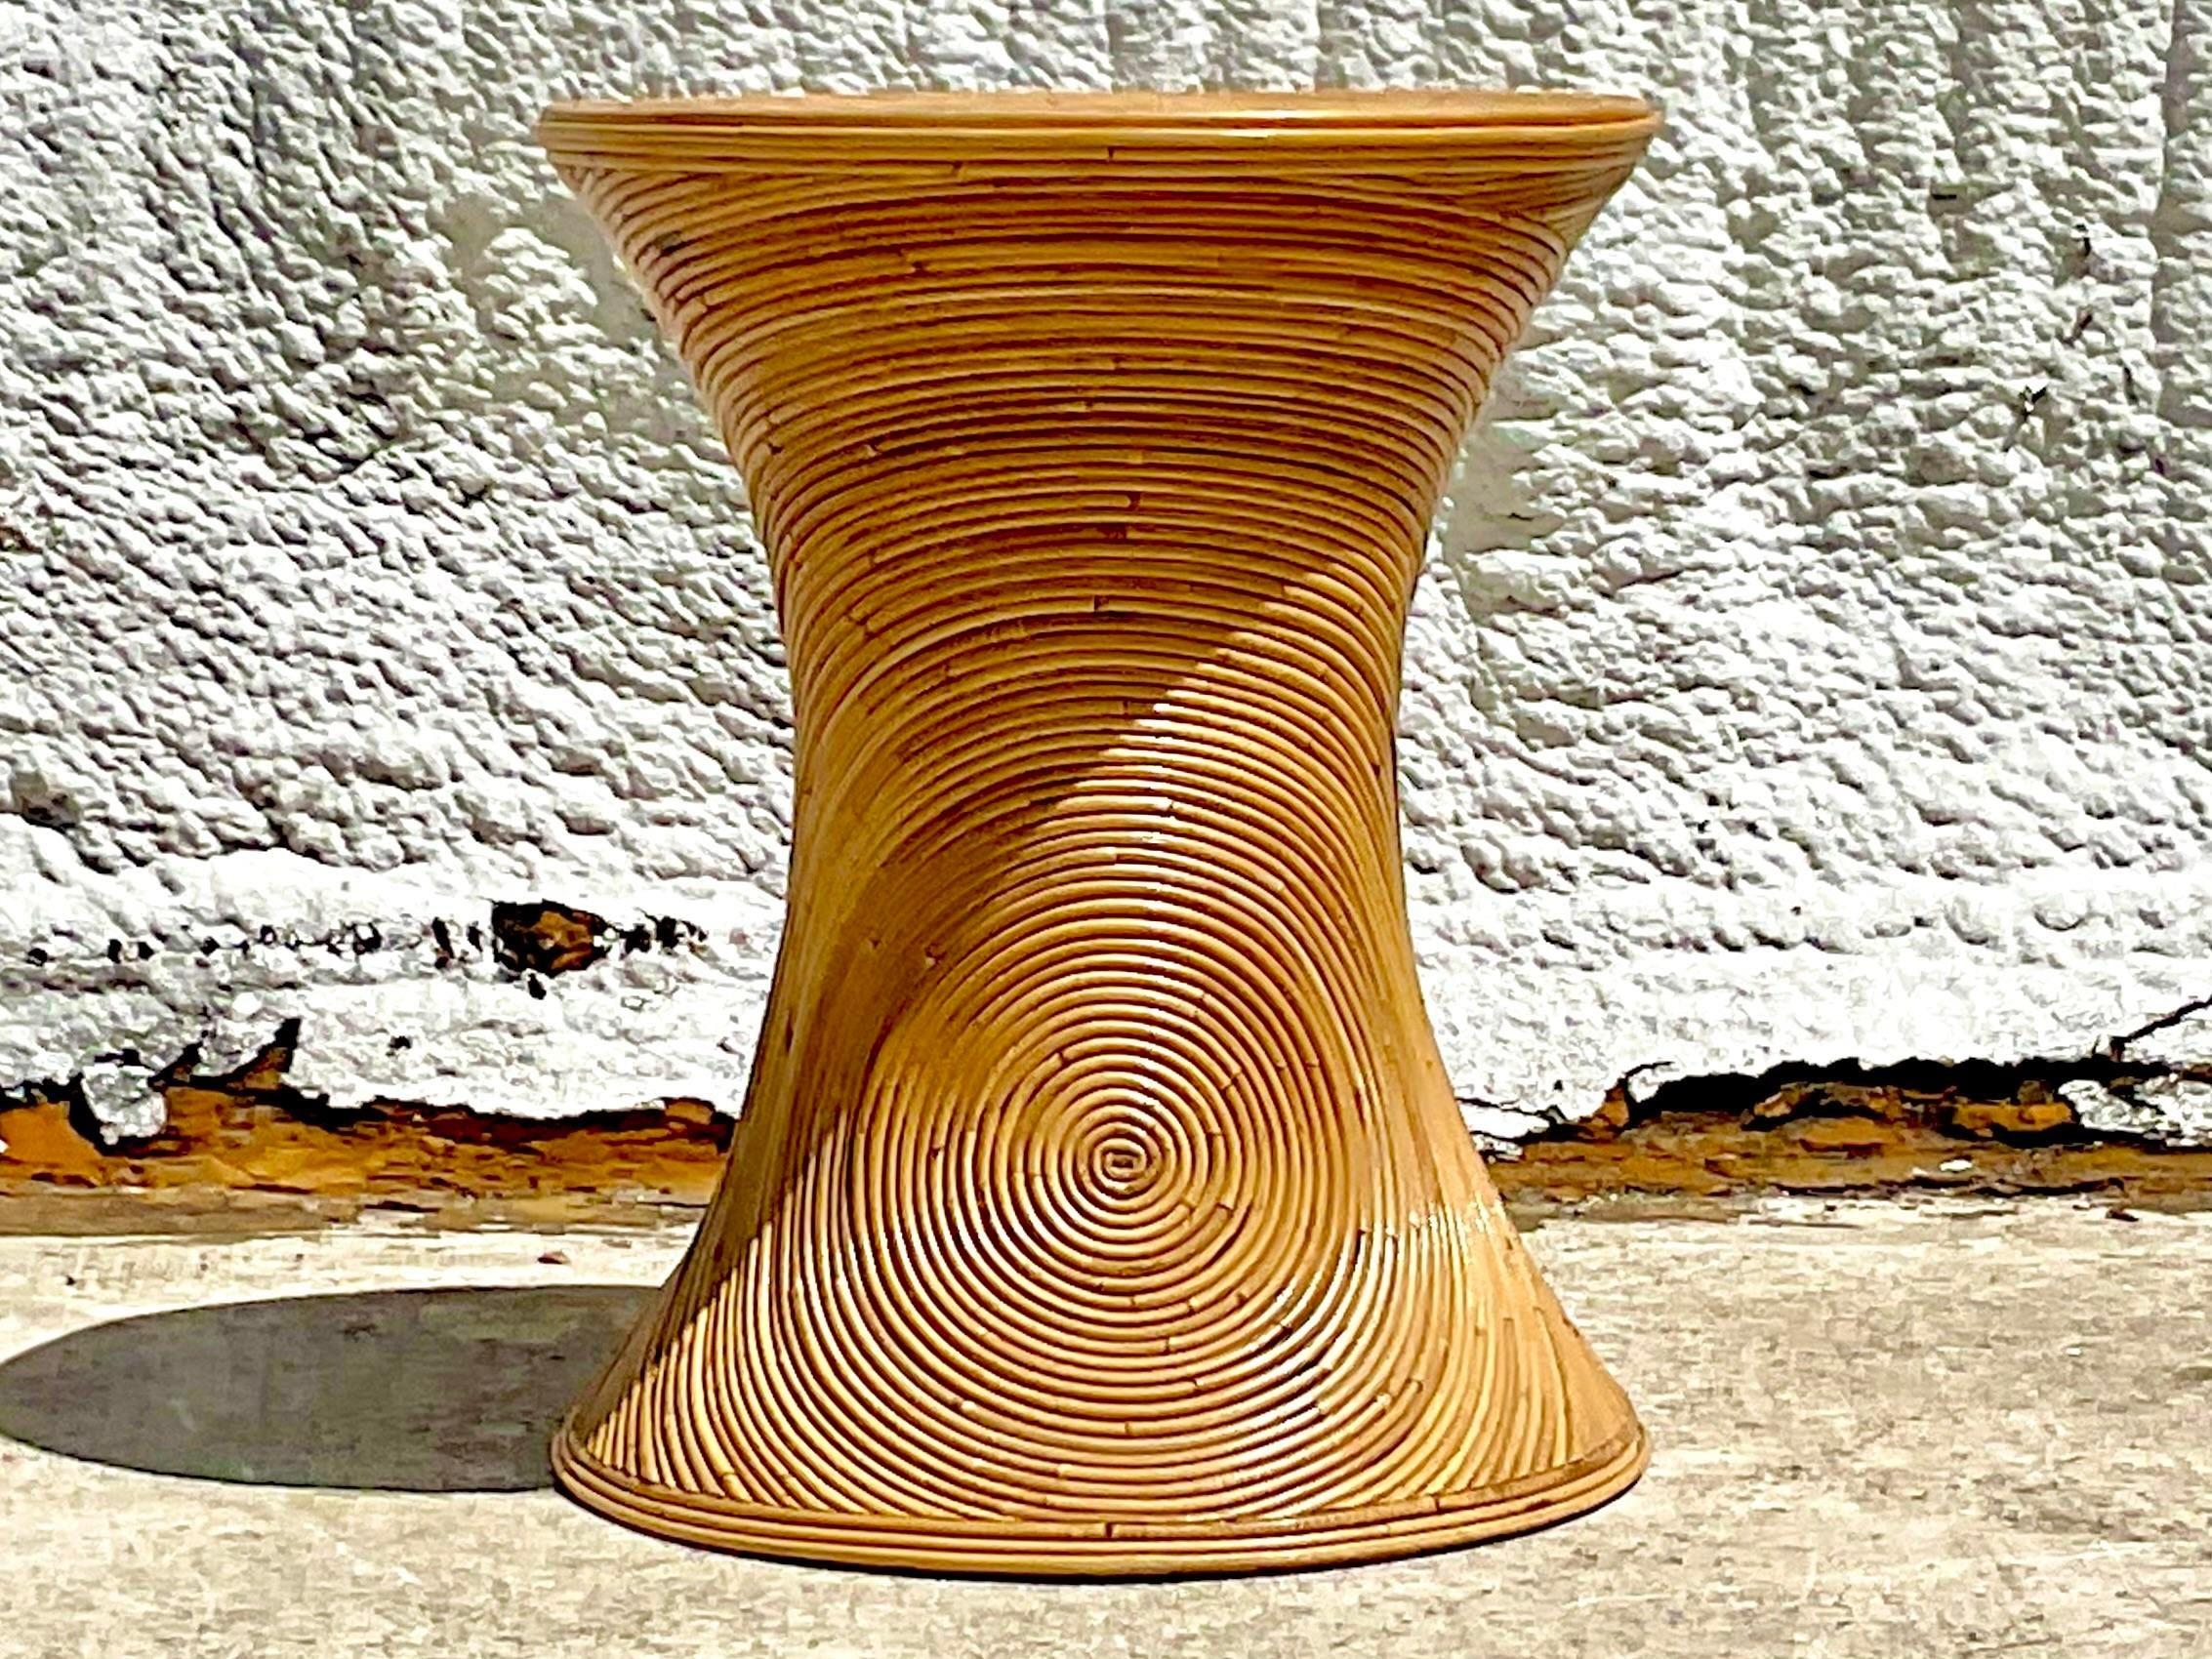 A fantastic vintage Coastal dining table Pedestal. Beautiful pencil reed in the radiating sun design. Perfect for your dining table, but also great as a sculpture pedestal. Acquired from a Palm Beach estate.